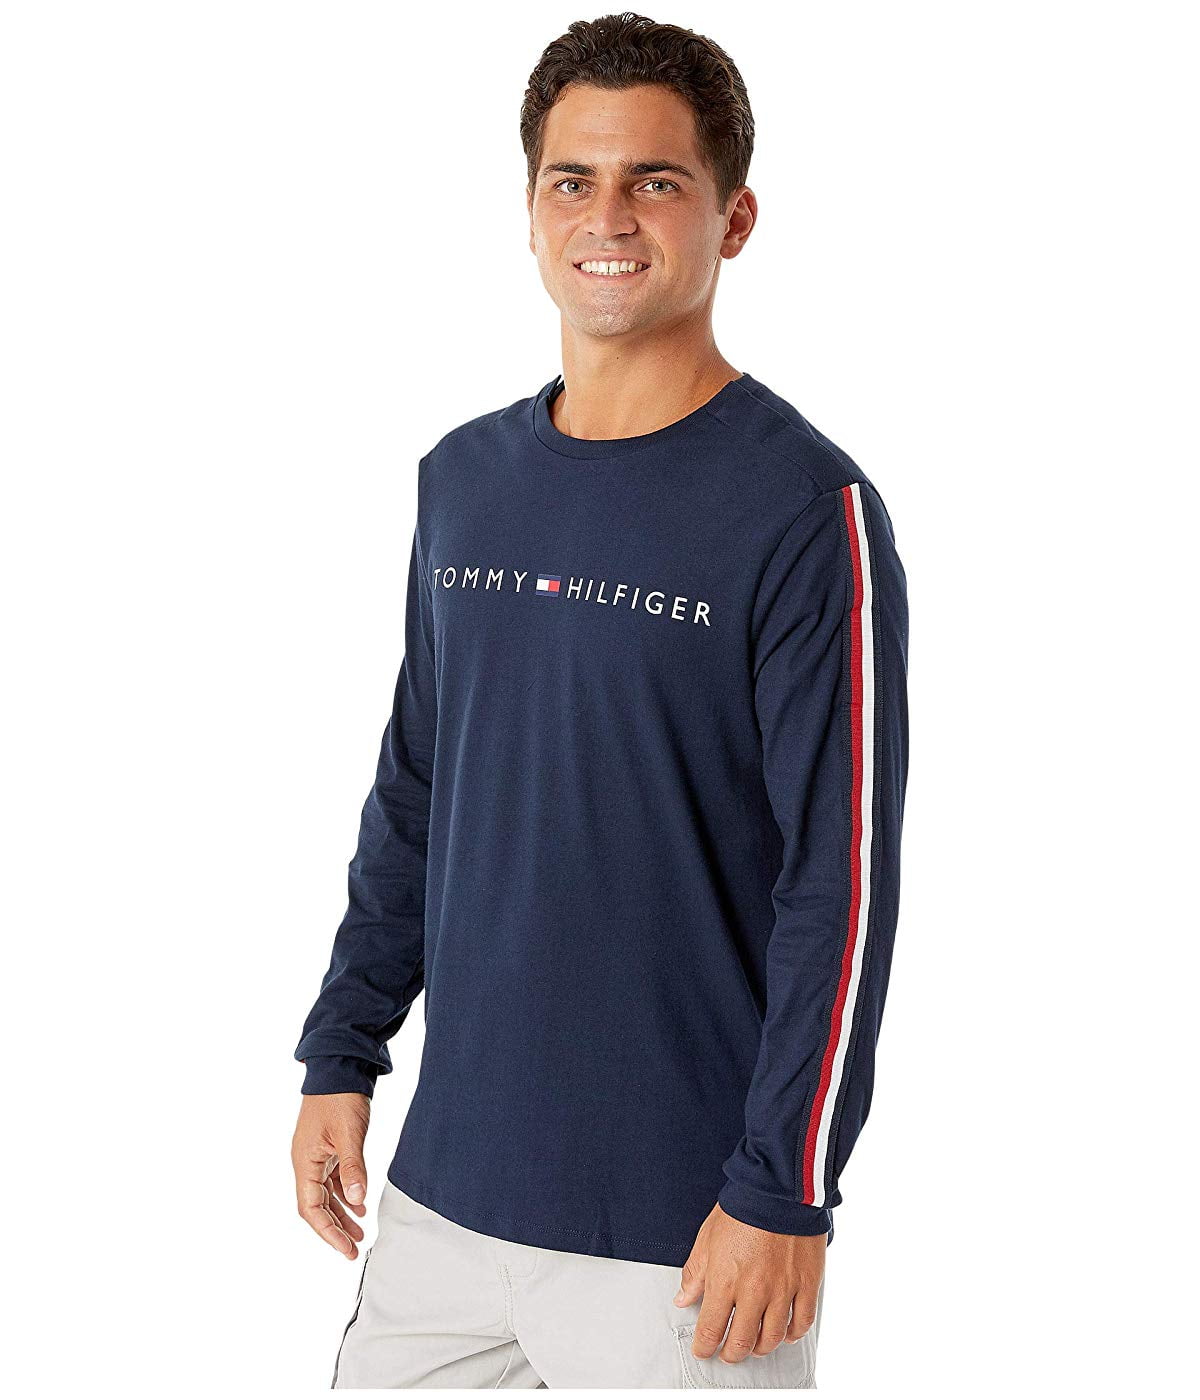 Tommy Hilfiger Boys Adaptive T Shirt with Velcro Brand Closure at Shoulders 